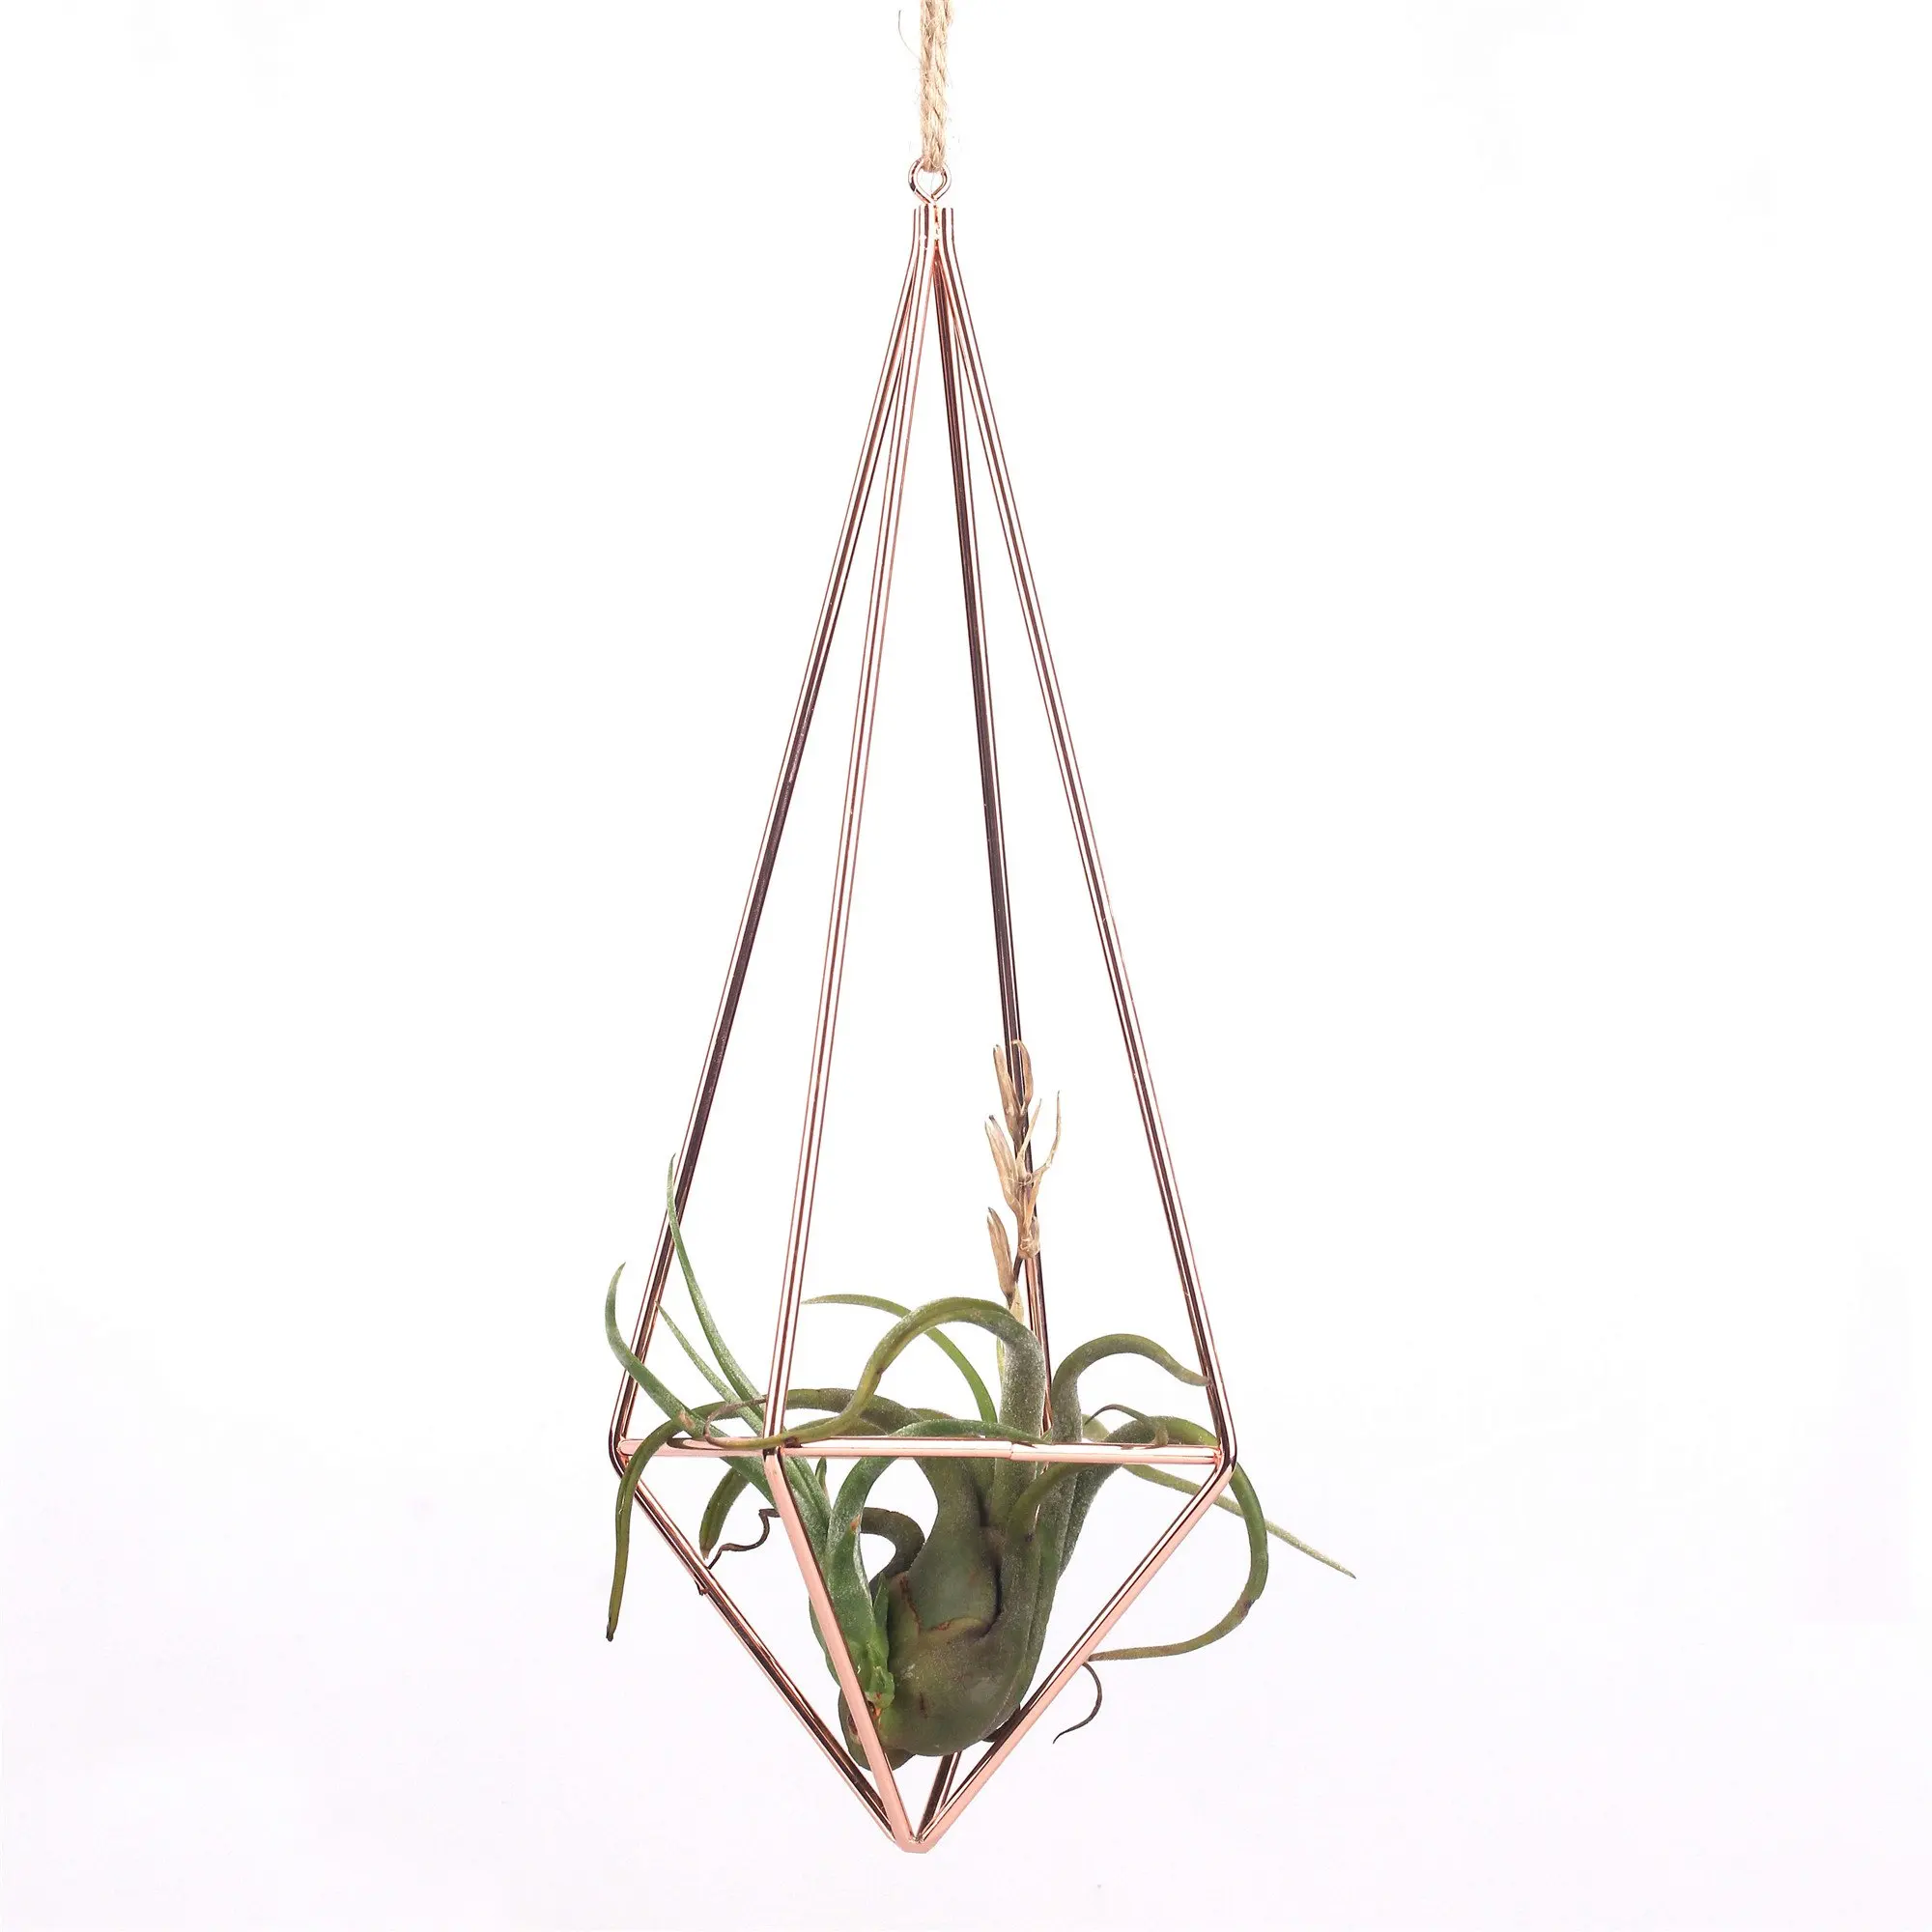 Bronze Rustic Style Freestanding Wall Hanging Geometric Metal Tillandsia Air Plants Rack Nydotd 3 Pack Hanging Air Plant Holder Himmeli for Tillandsia Airplants Display with Chains